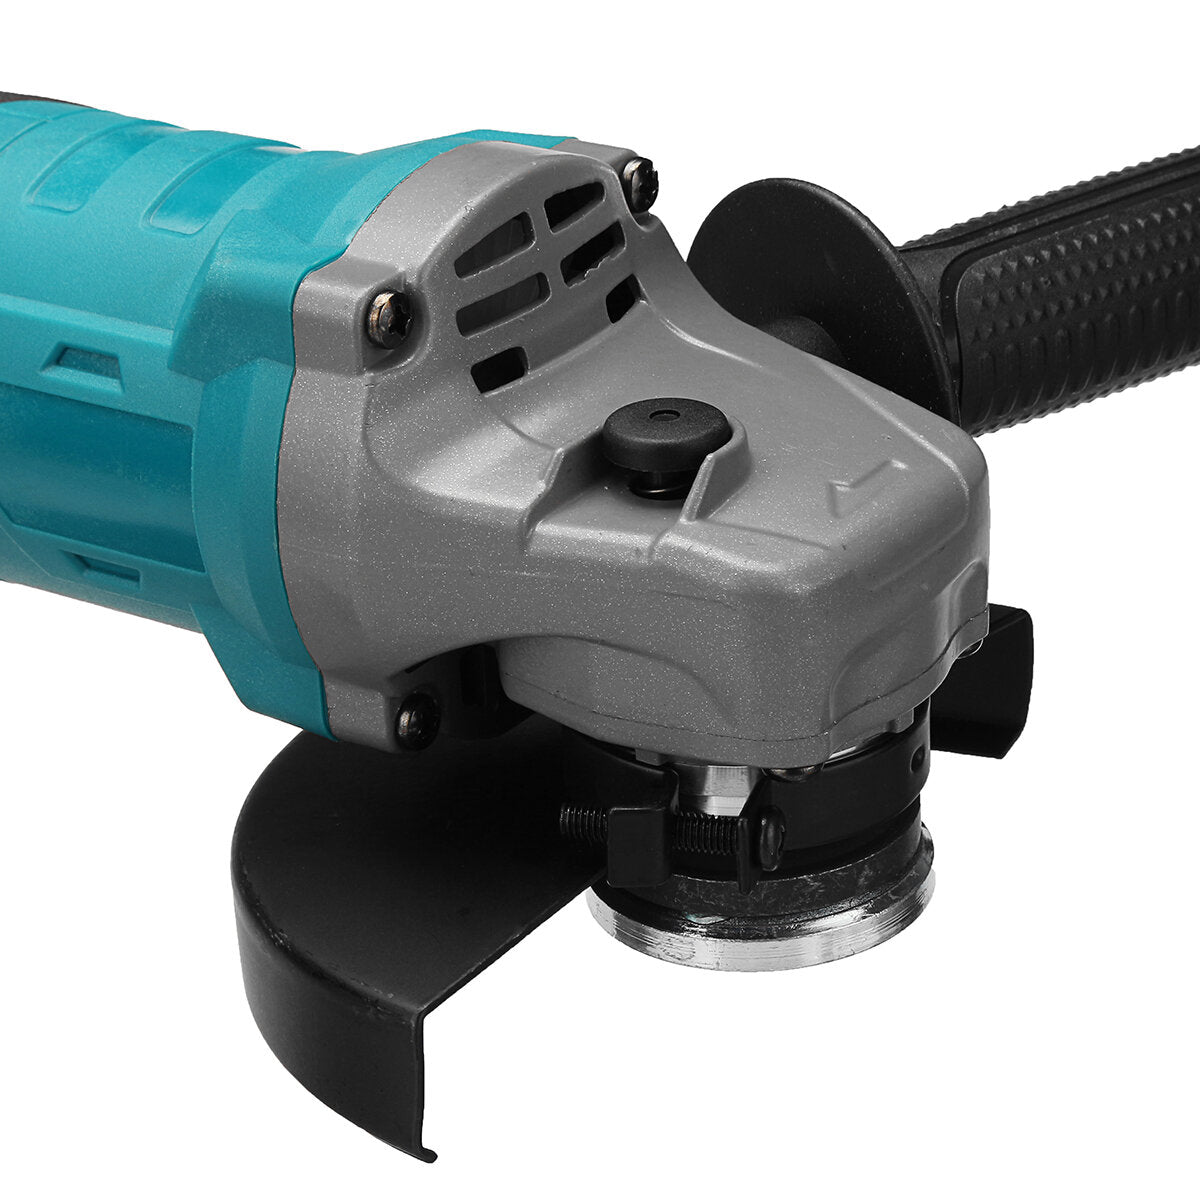 125MM Rubber + ABS + Steel 388VF 1600W 3-Speed Brushless Electric Polisher